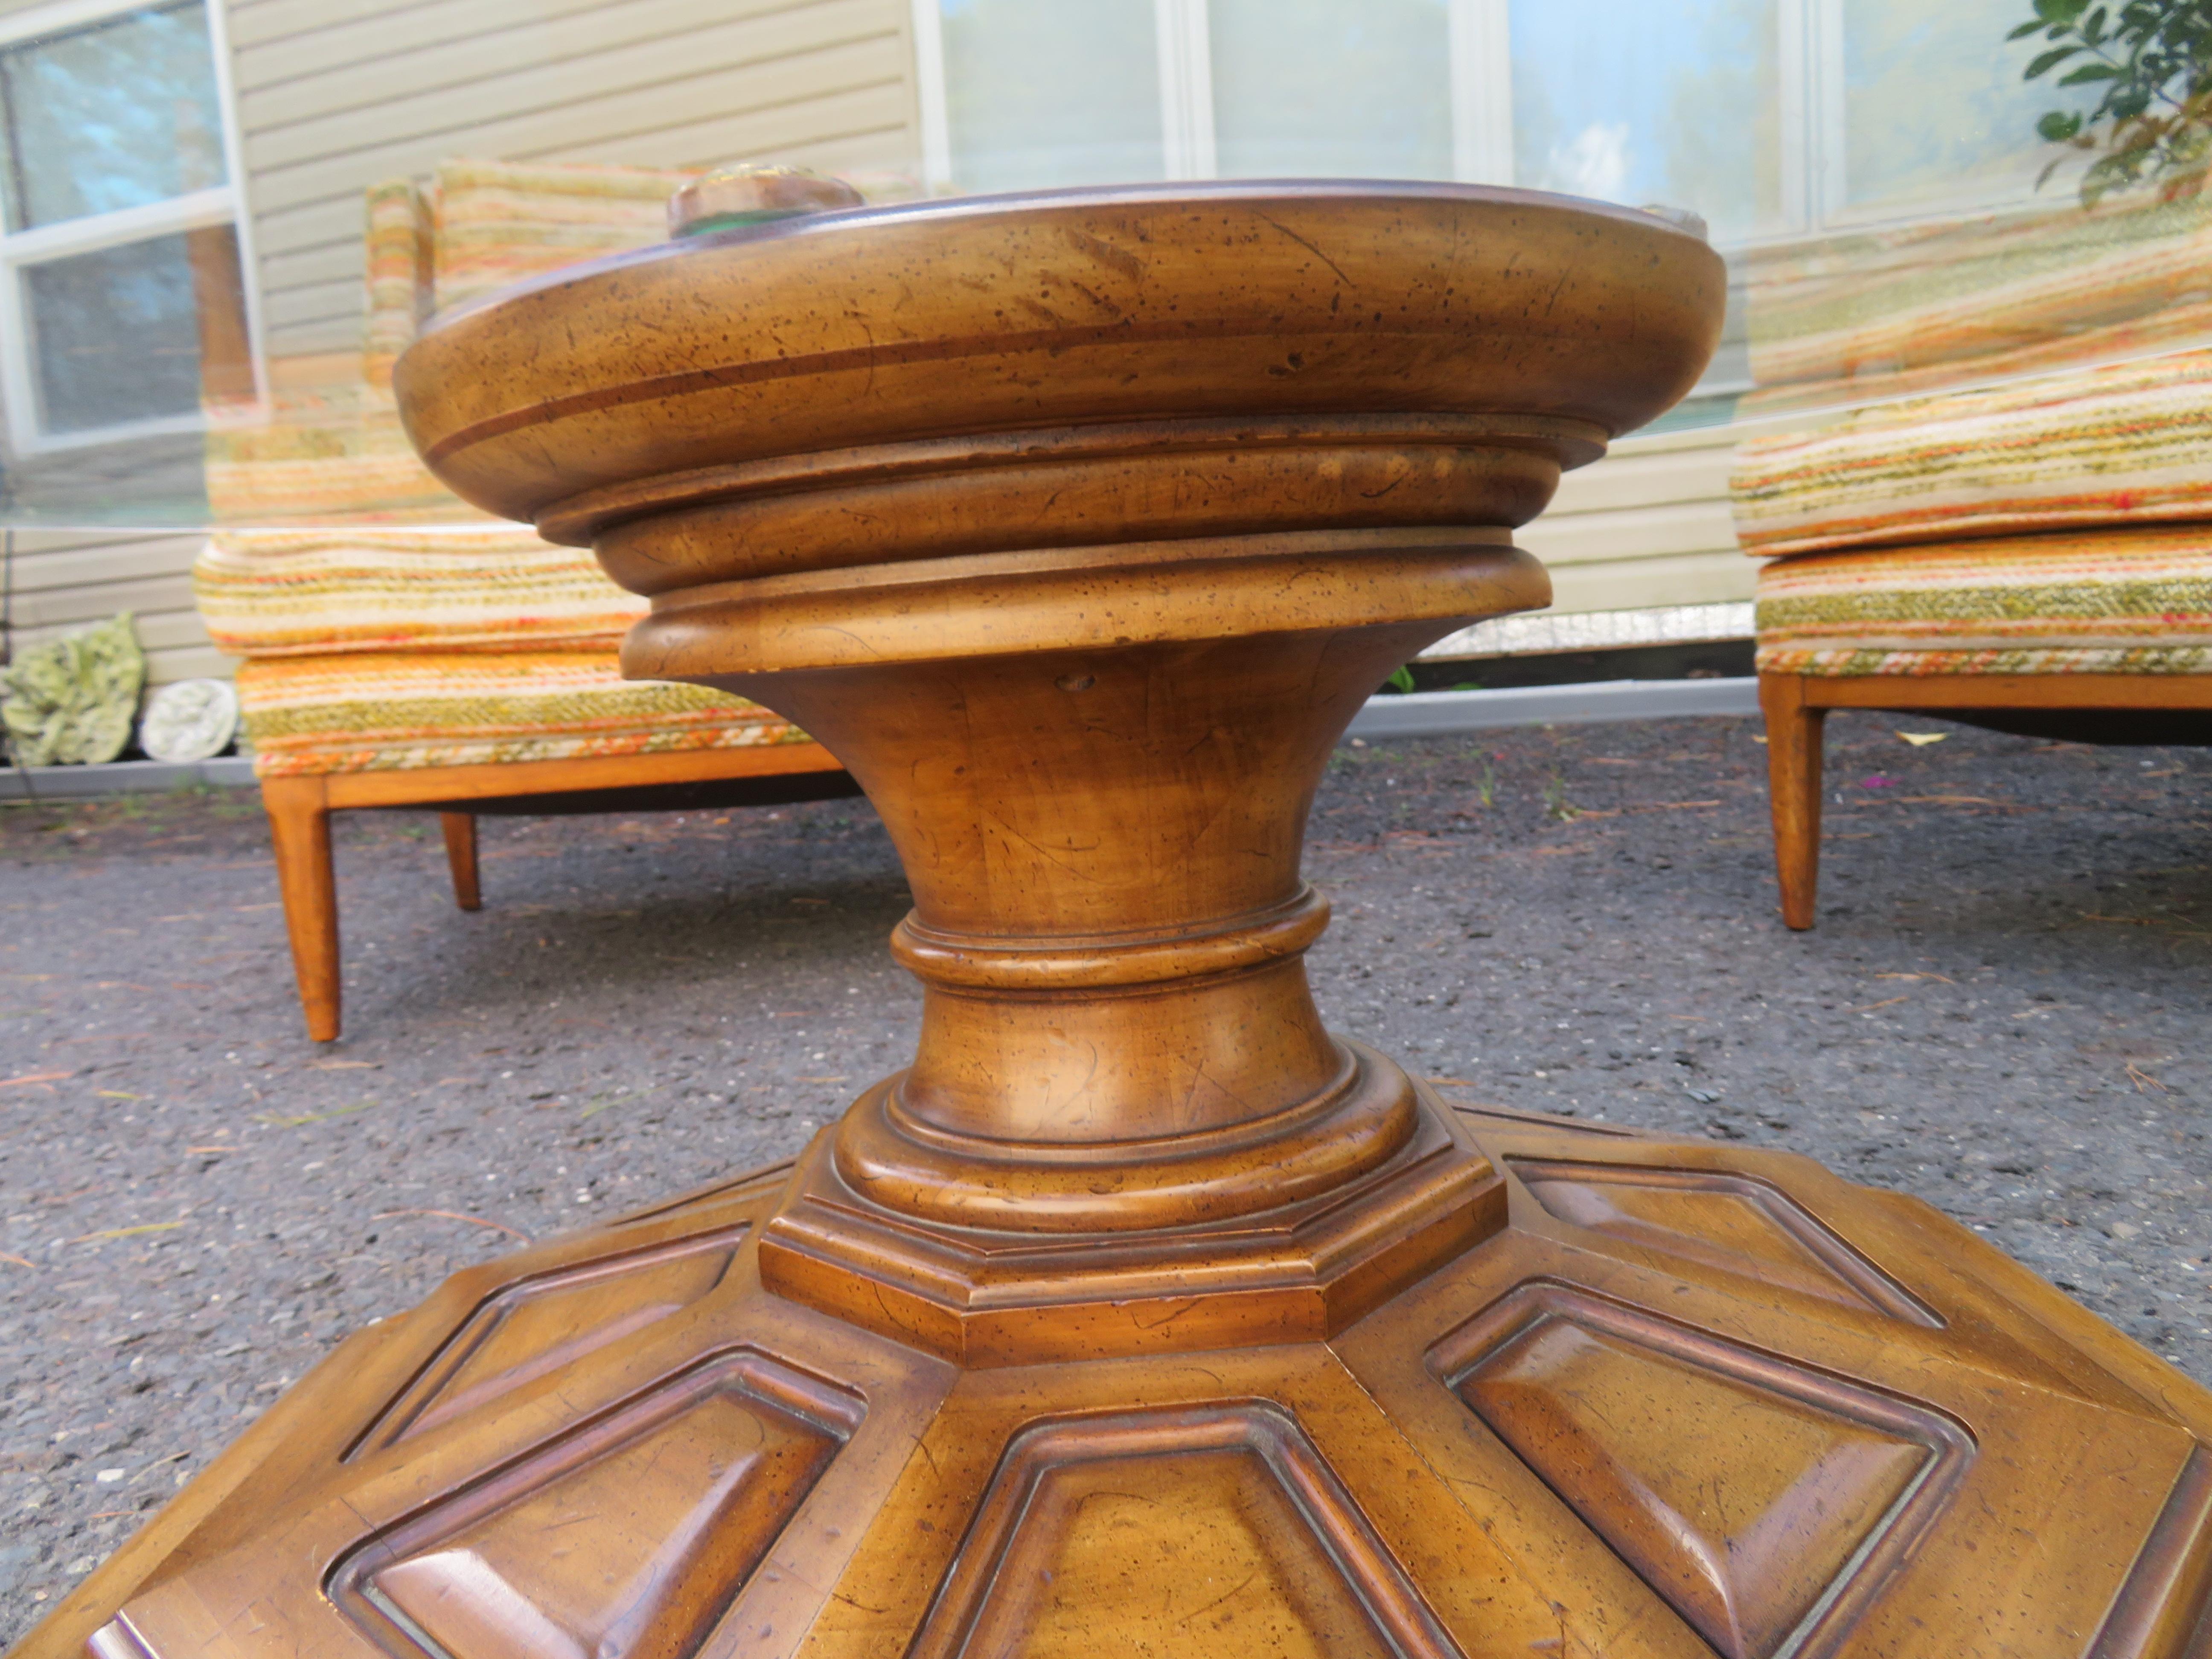 Lovely 60's Weiman Provincial Fruitwood Round Coffee Table Mid-Century In Good Condition For Sale In Pemberton, NJ